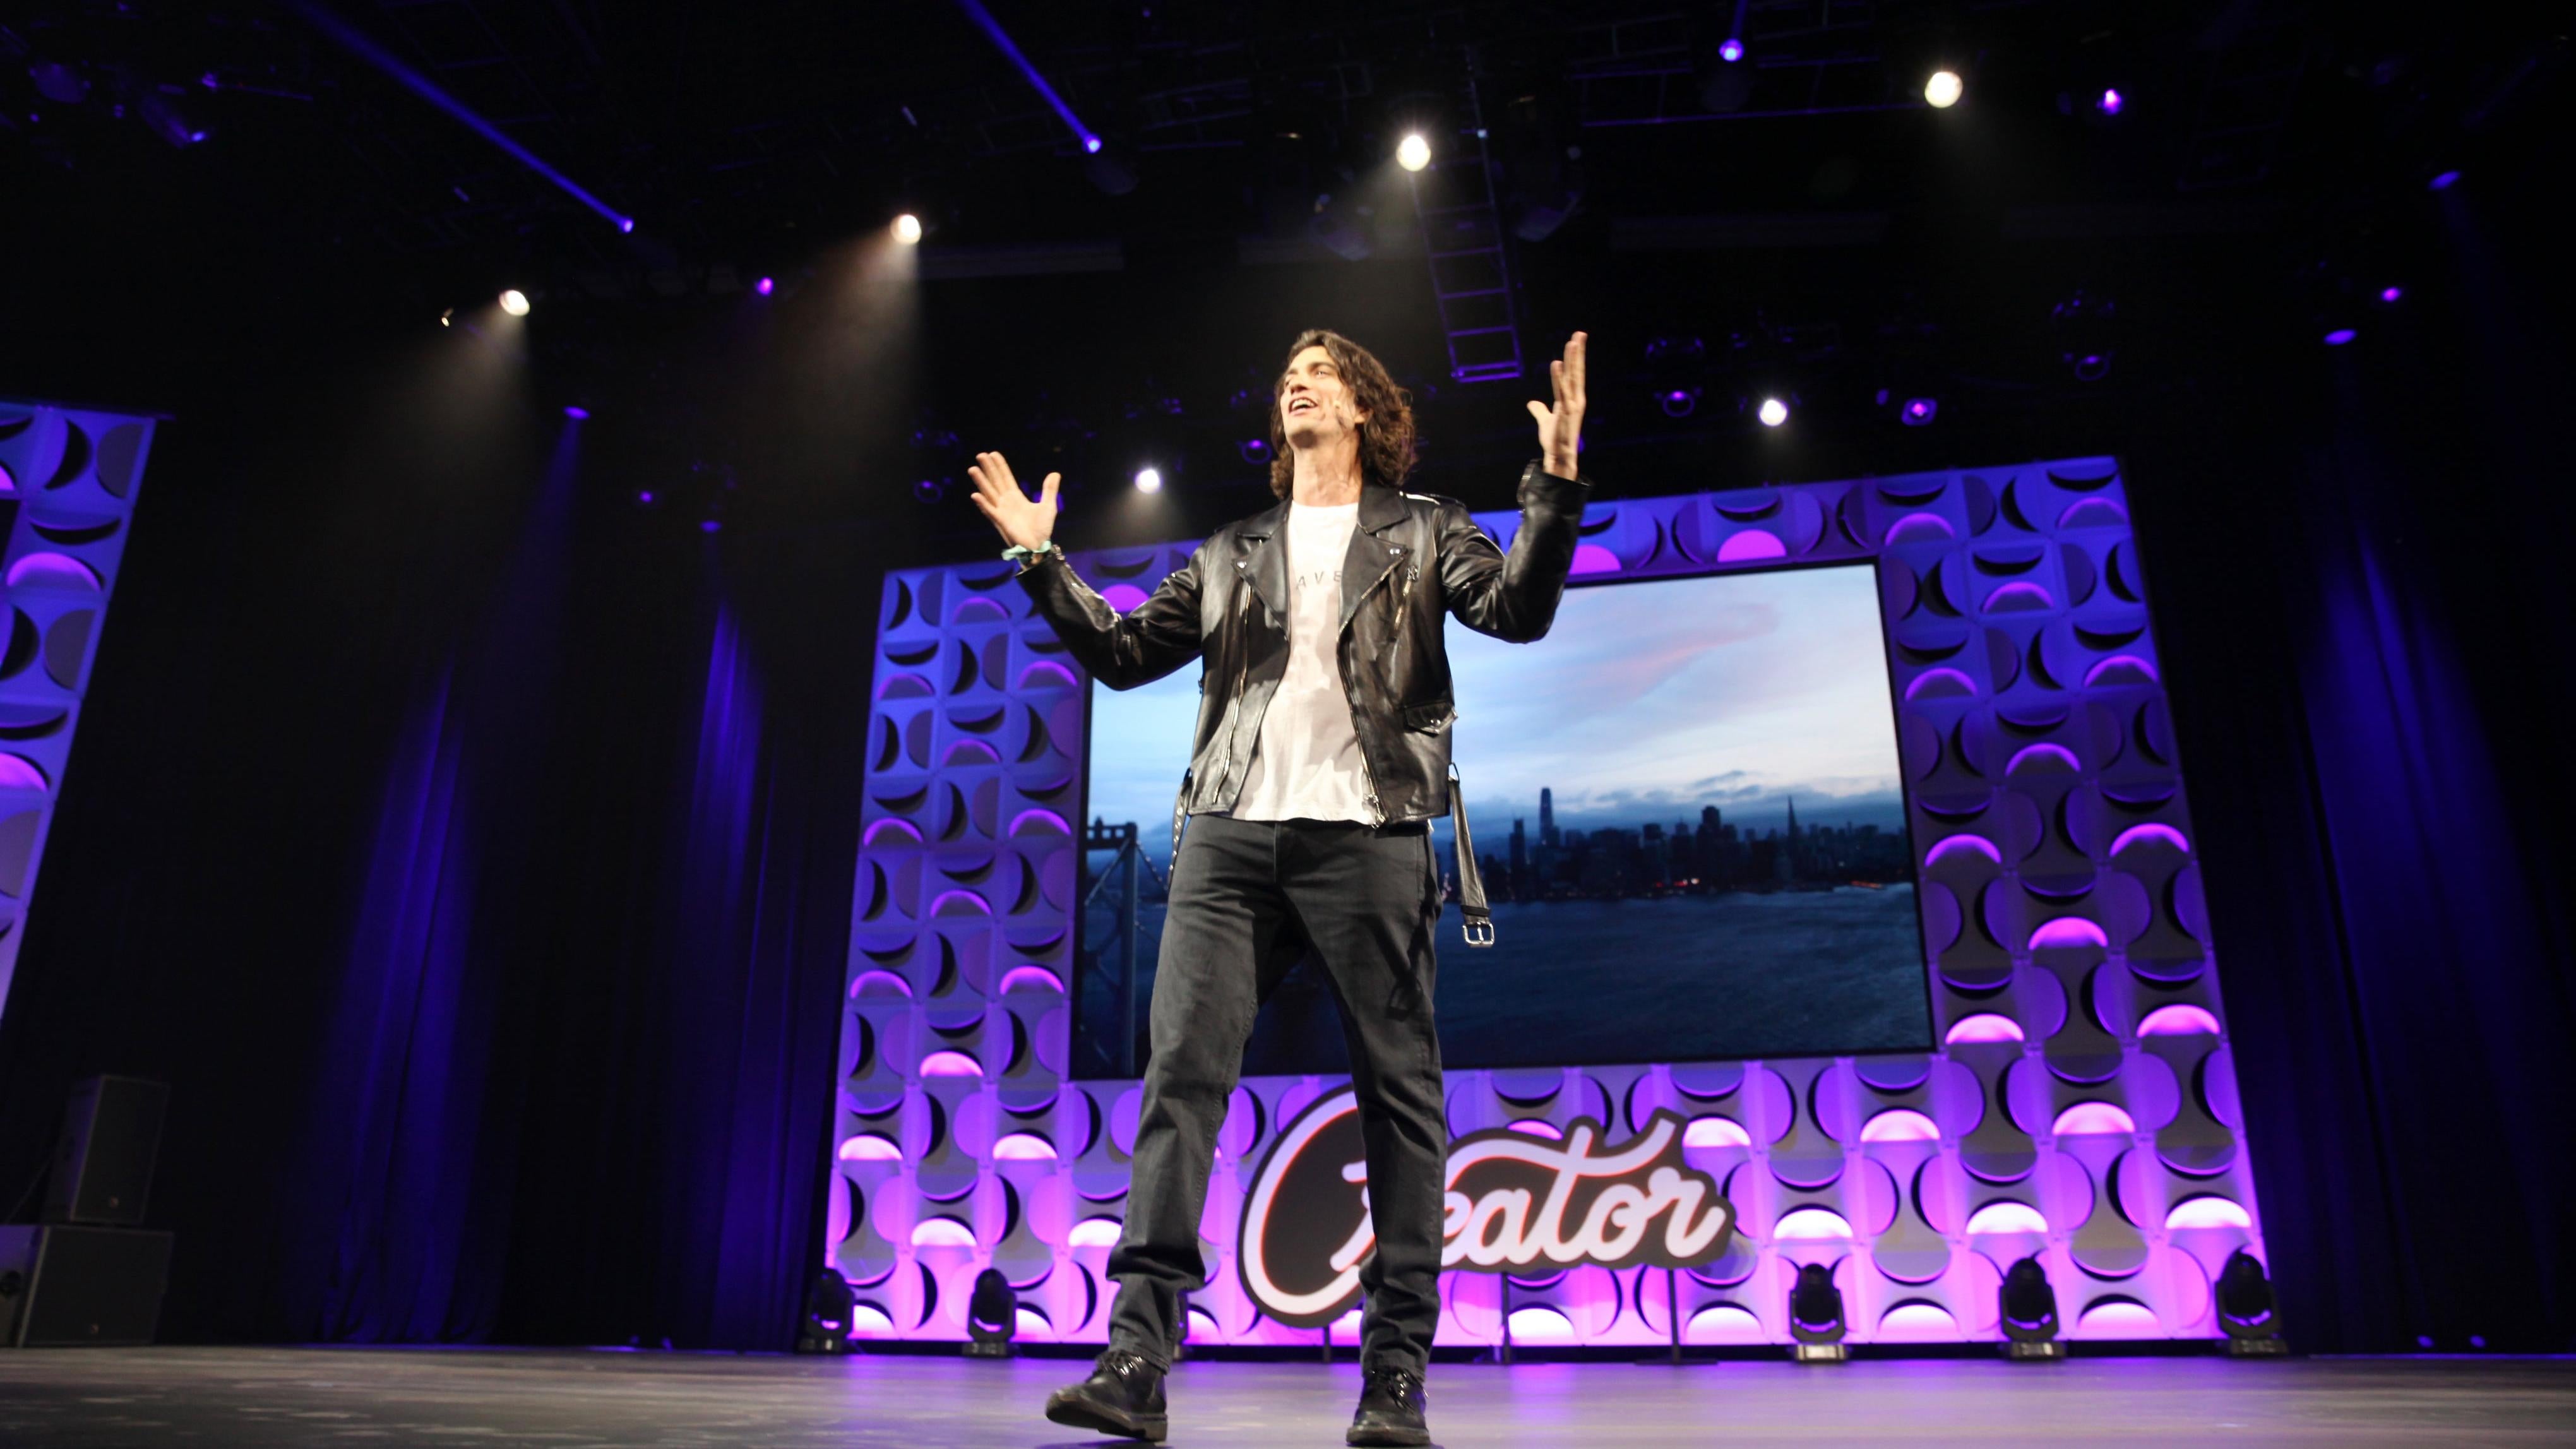 Adam Neumann fell a long way since the 2018 WeWork San Francisco Creator Awards, but even high profile implosion of the company he created didn't stop major crypto investors stepping up to fund his new Web3 and crypto-adjacent ventures. (Photo: Kelly Sullivan, Getty Images)